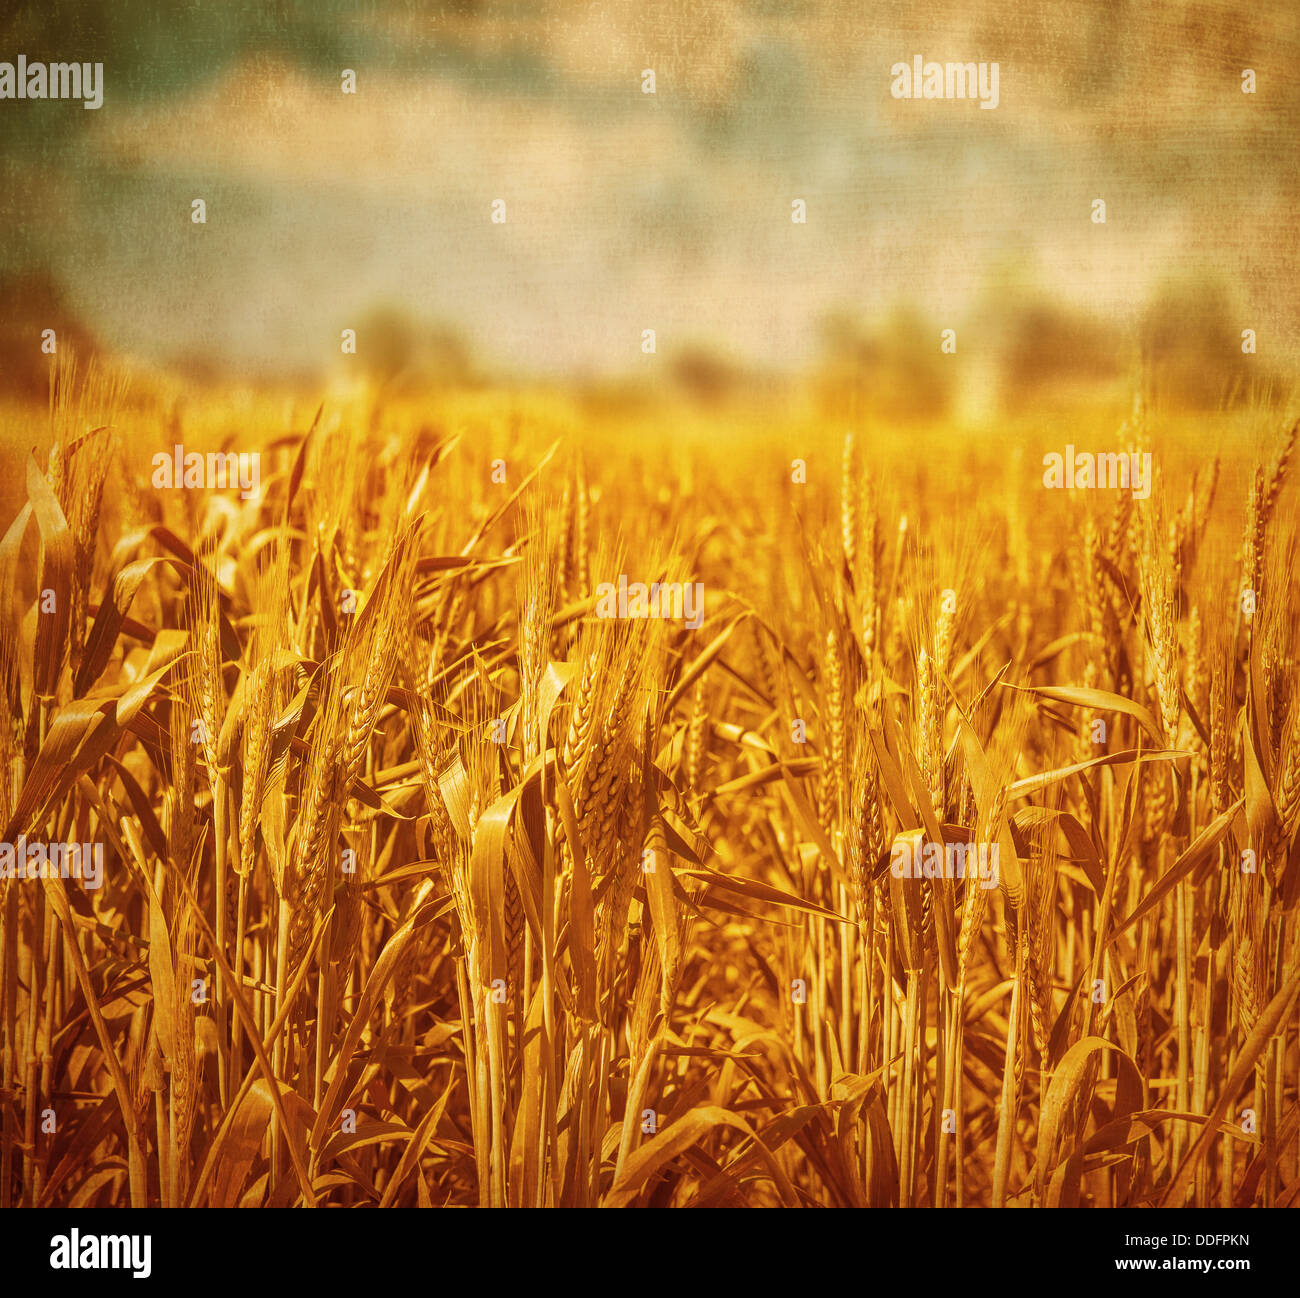 Beautiful golden wheat field over cloudy sky background, grunge photo, retro style image, agricultural meadow Stock Photo